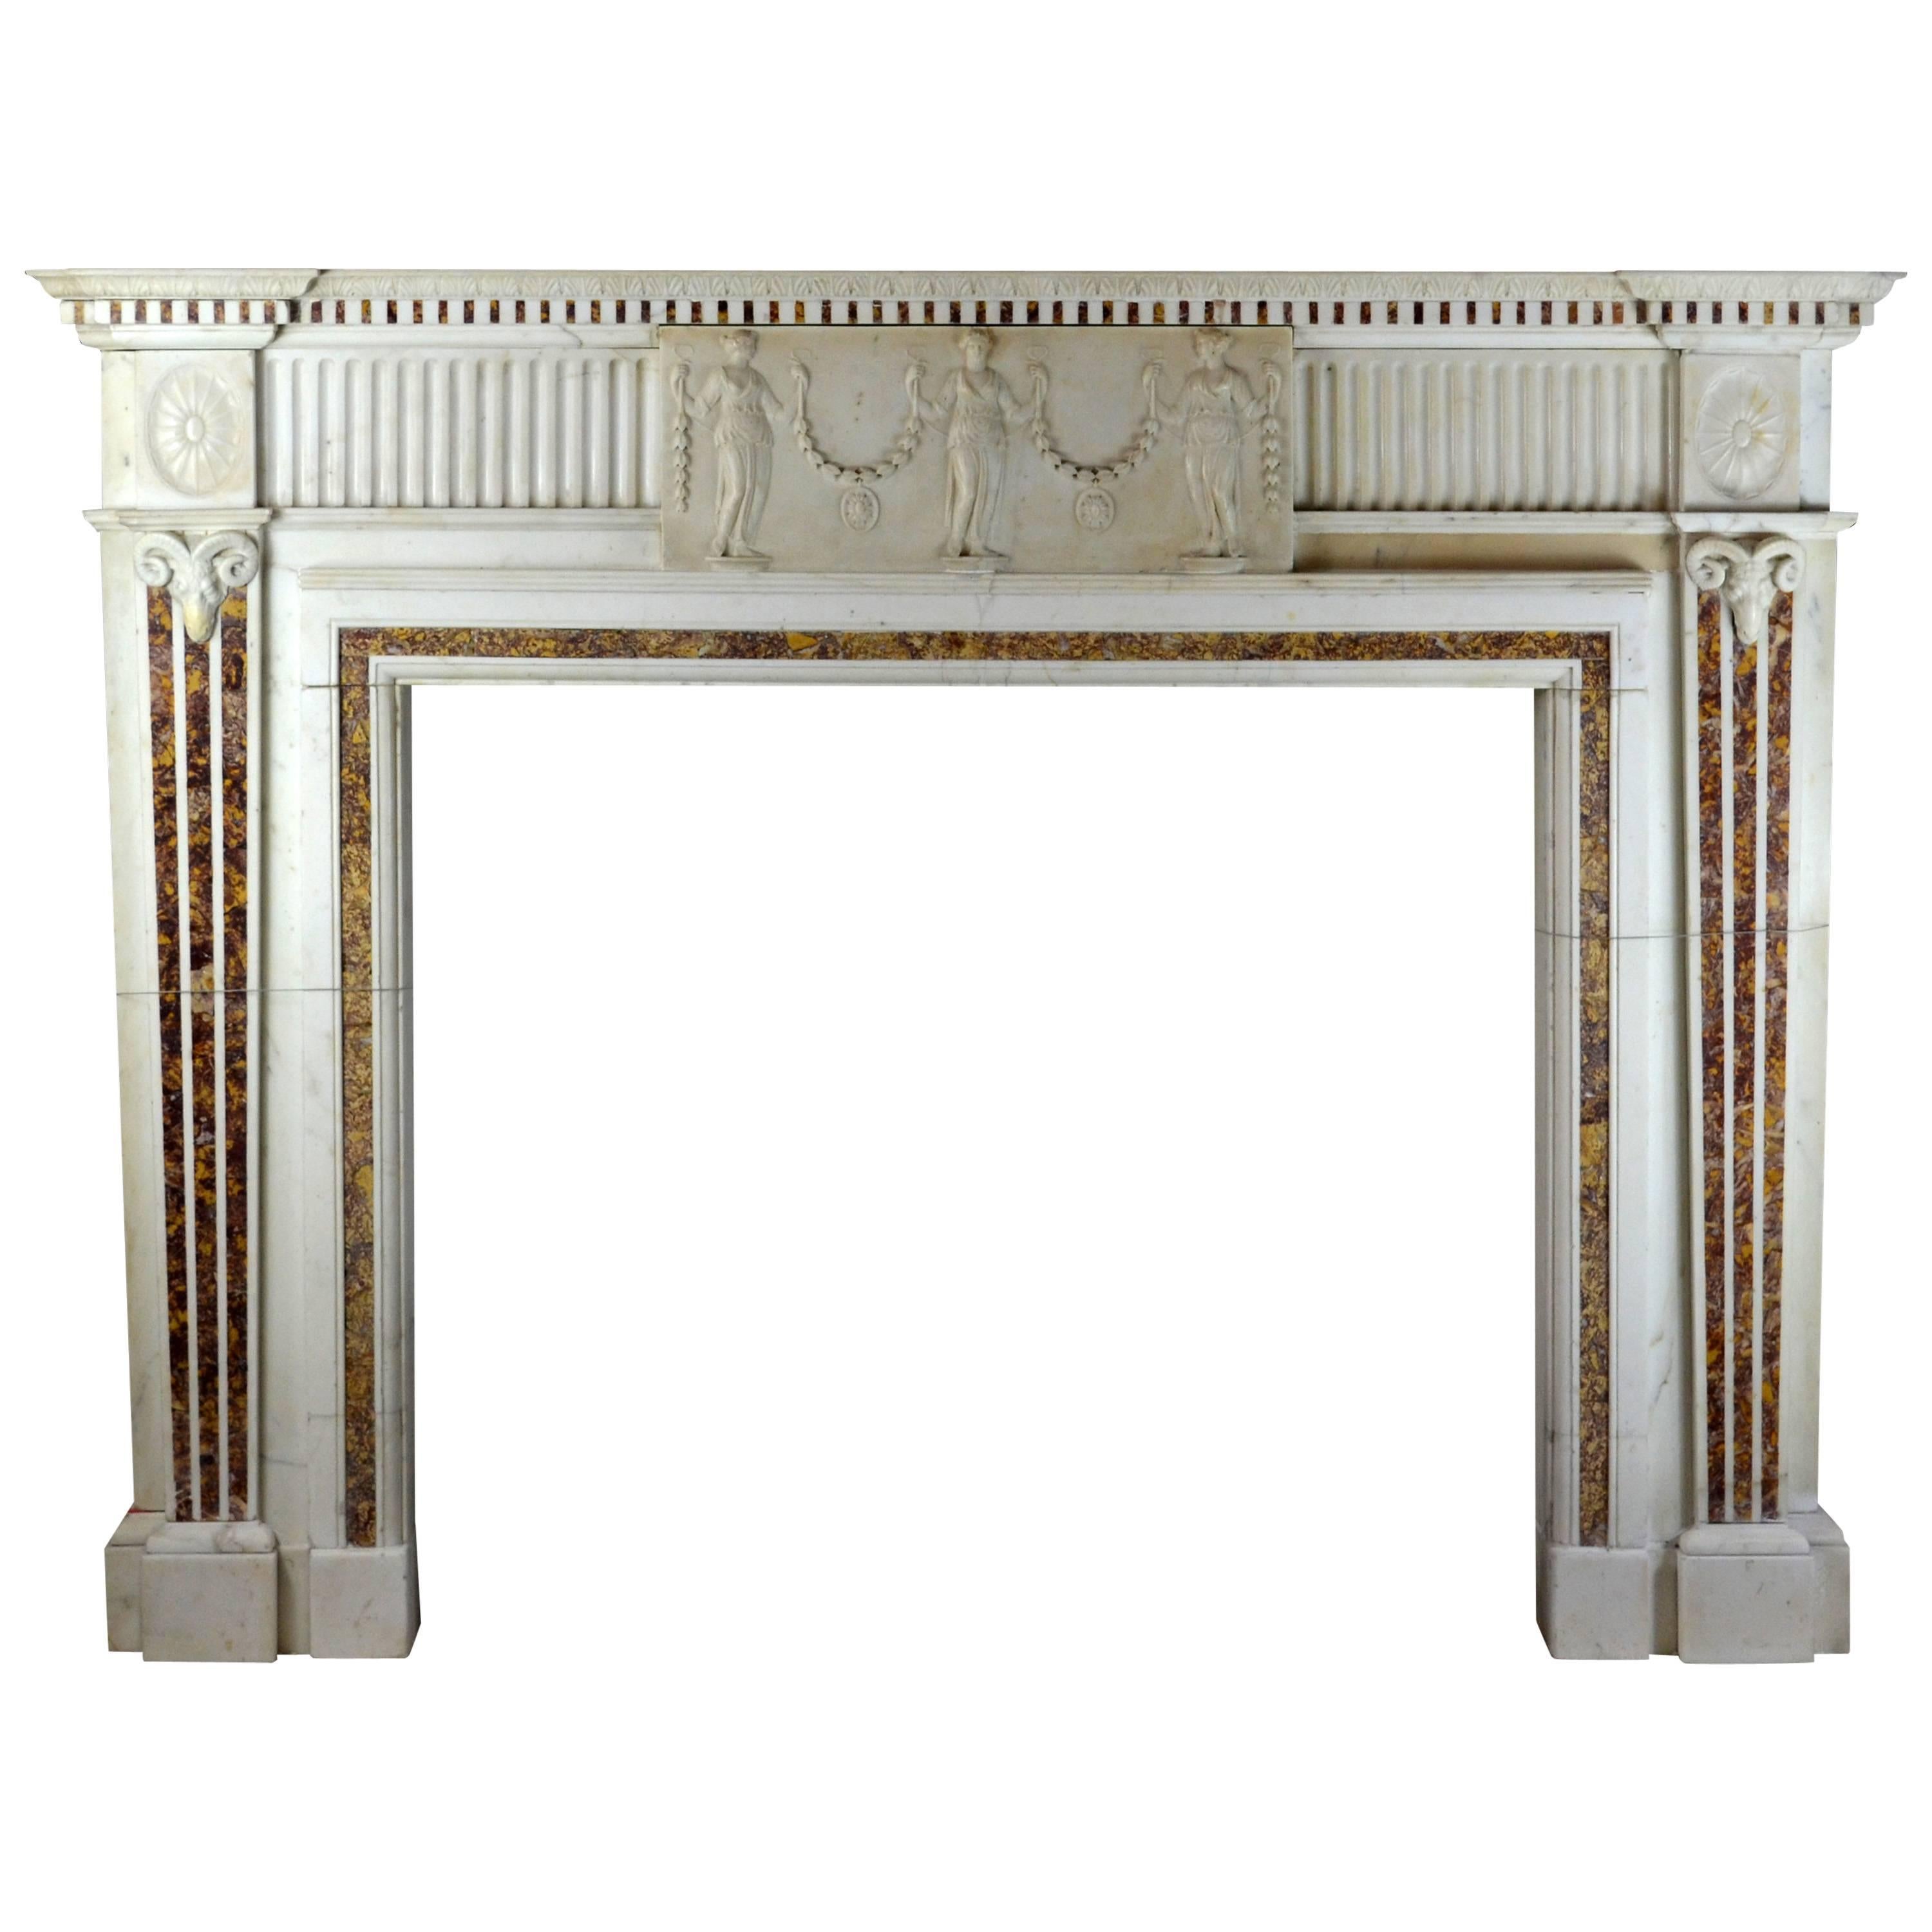 18th Century Georgian Mantel with Brocatella Inlays and Fine Carving 'GEO-ZE54' For Sale